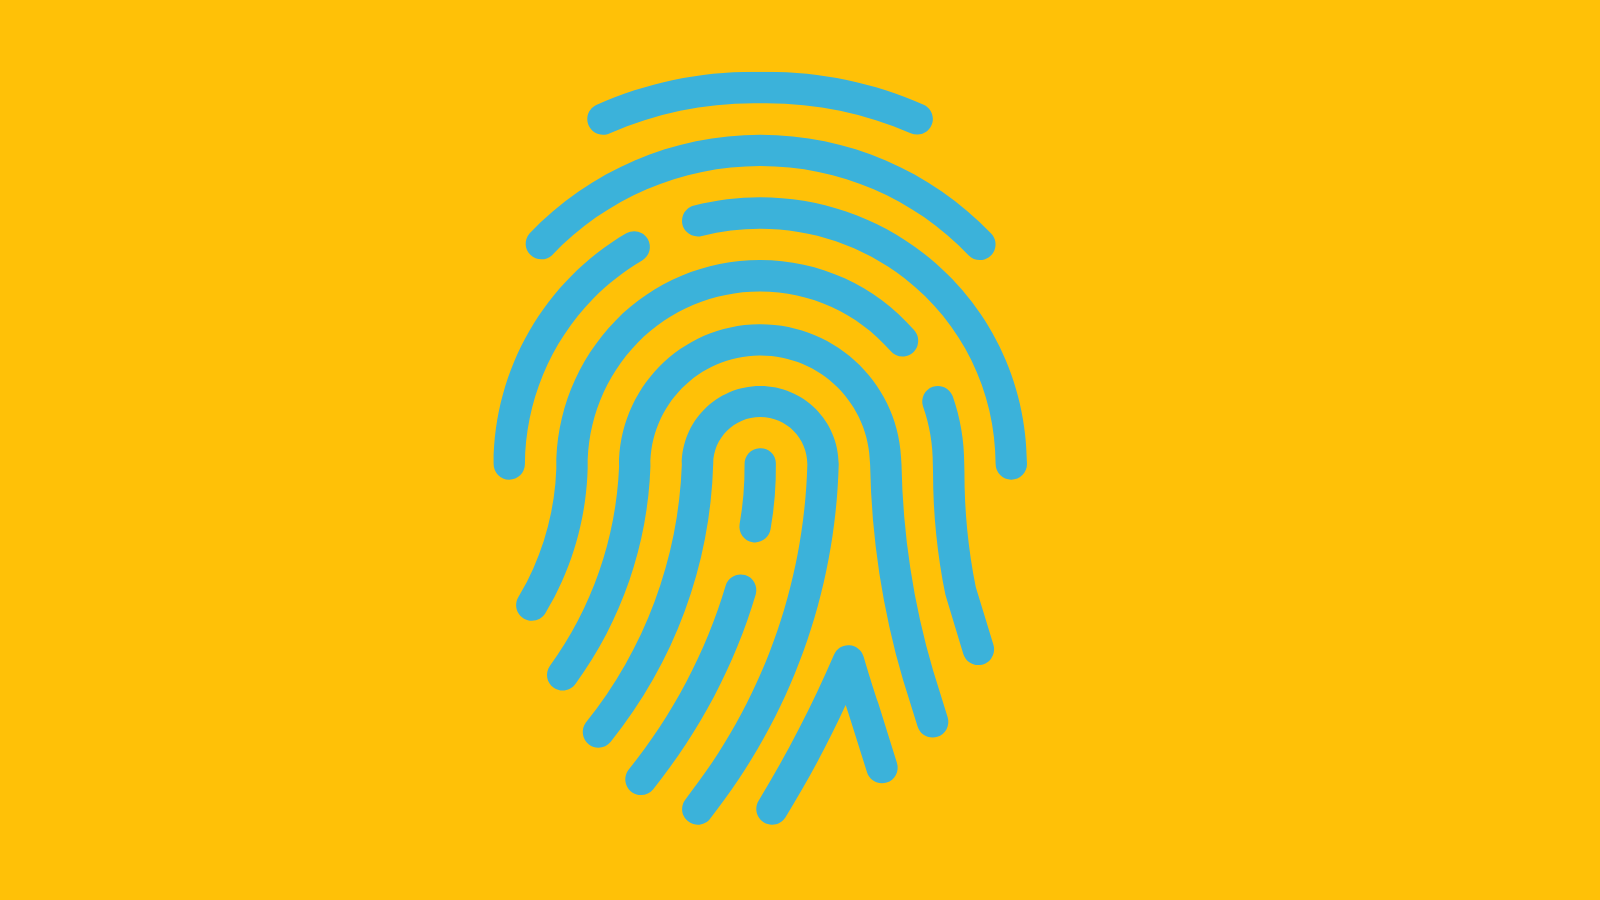 A giant blue fingerprint on a yellow background